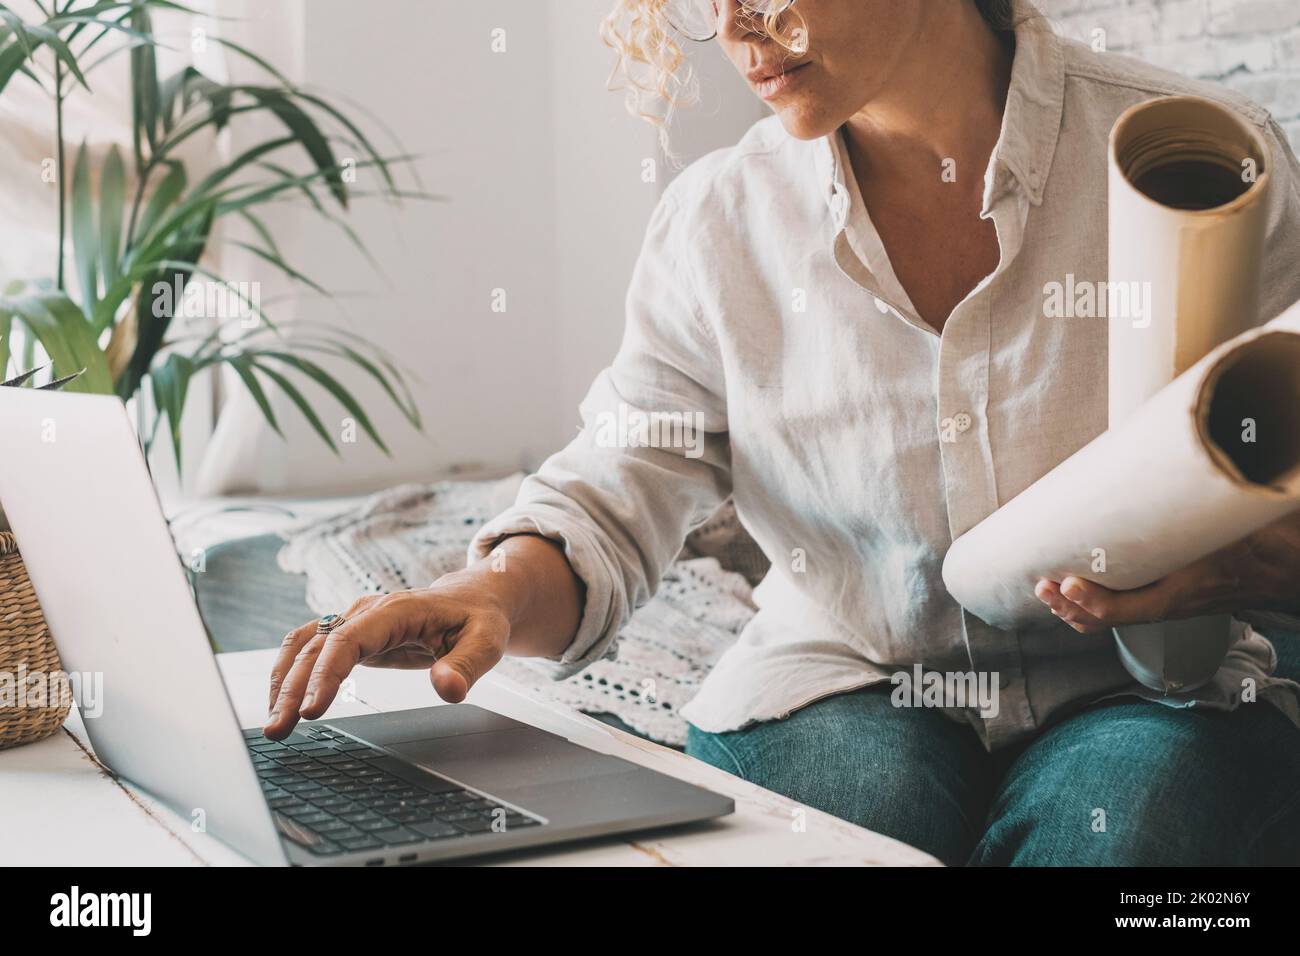 Designer at work in home office using laptop. Woman using laptop and wireless technology. Modern people with computer and paper working online. Indoor leisure activity people and connection business Stock Photo